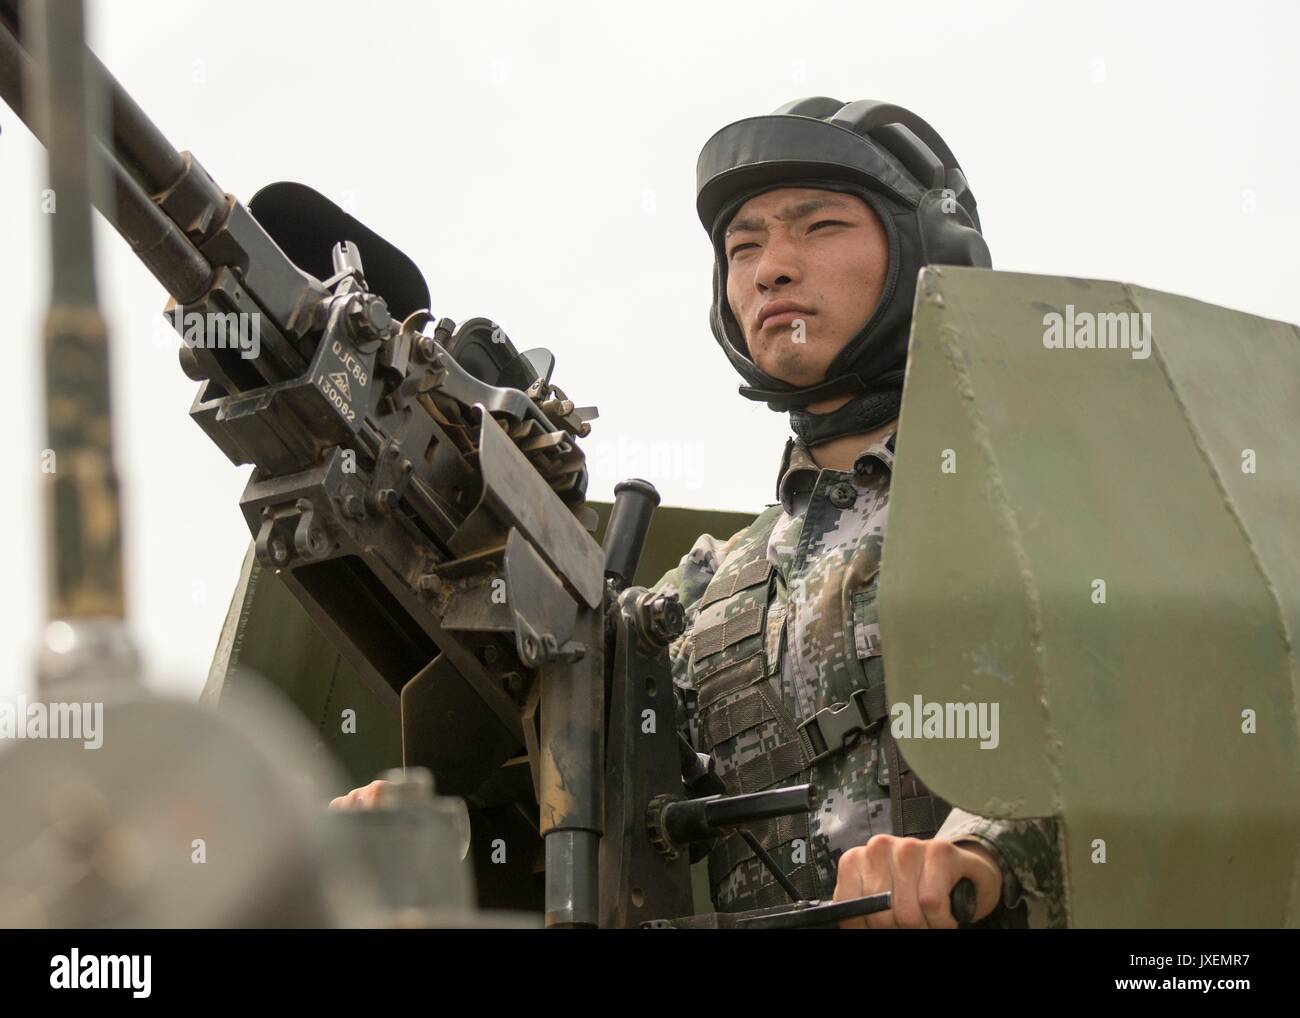 Haichung, China. 16th Aug, 2017. A Chinese People's Liberation Army soldier mans a heavy machine gun on a WZ531 armored personal carrier during an attack exercise at the Chinese Northern Theater Command Army Force Haichung Camp August 16, 2017 in Haichung, China. The exercise was for visiting U.S. Chairman of the Joint Chiefs Gen. Joseph Dunford. Credit: Planetpix/Alamy Live News Stock Photo